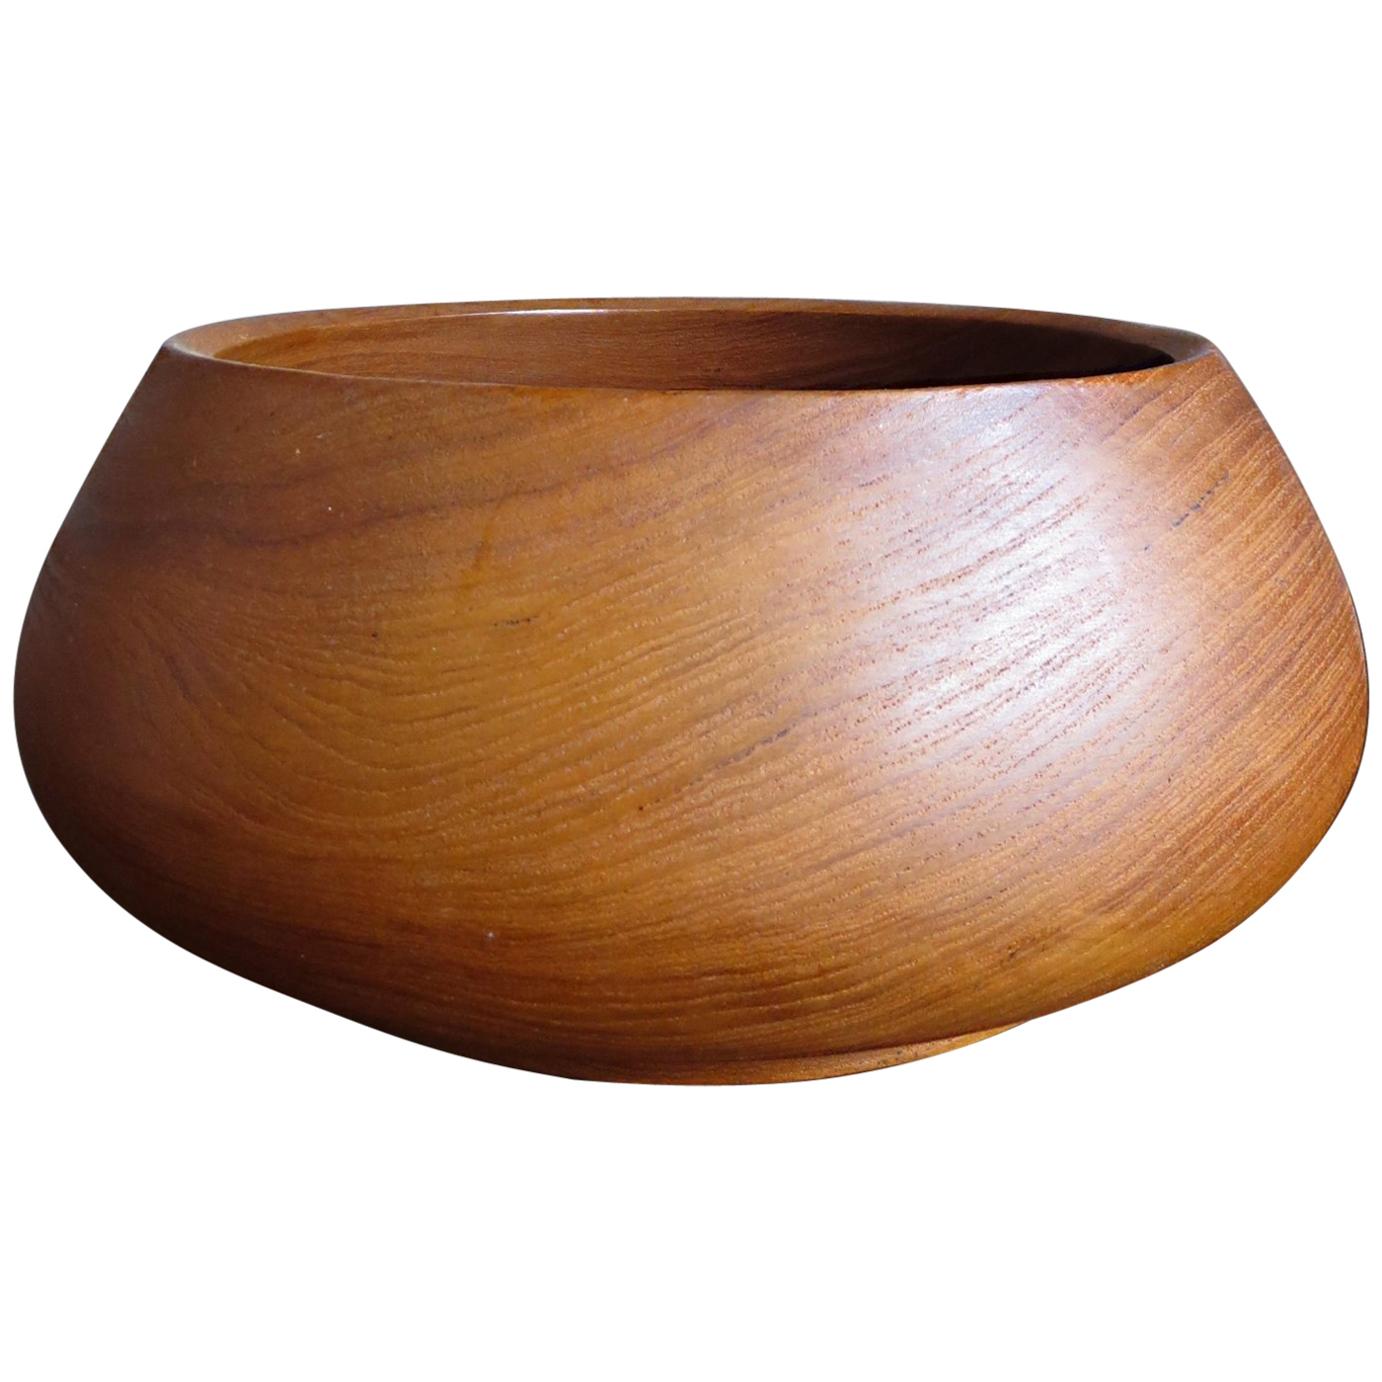 Large Danish Midcentury Hand Moulded & Organic Rounded Shaped Teak Bowl , 1950s For Sale